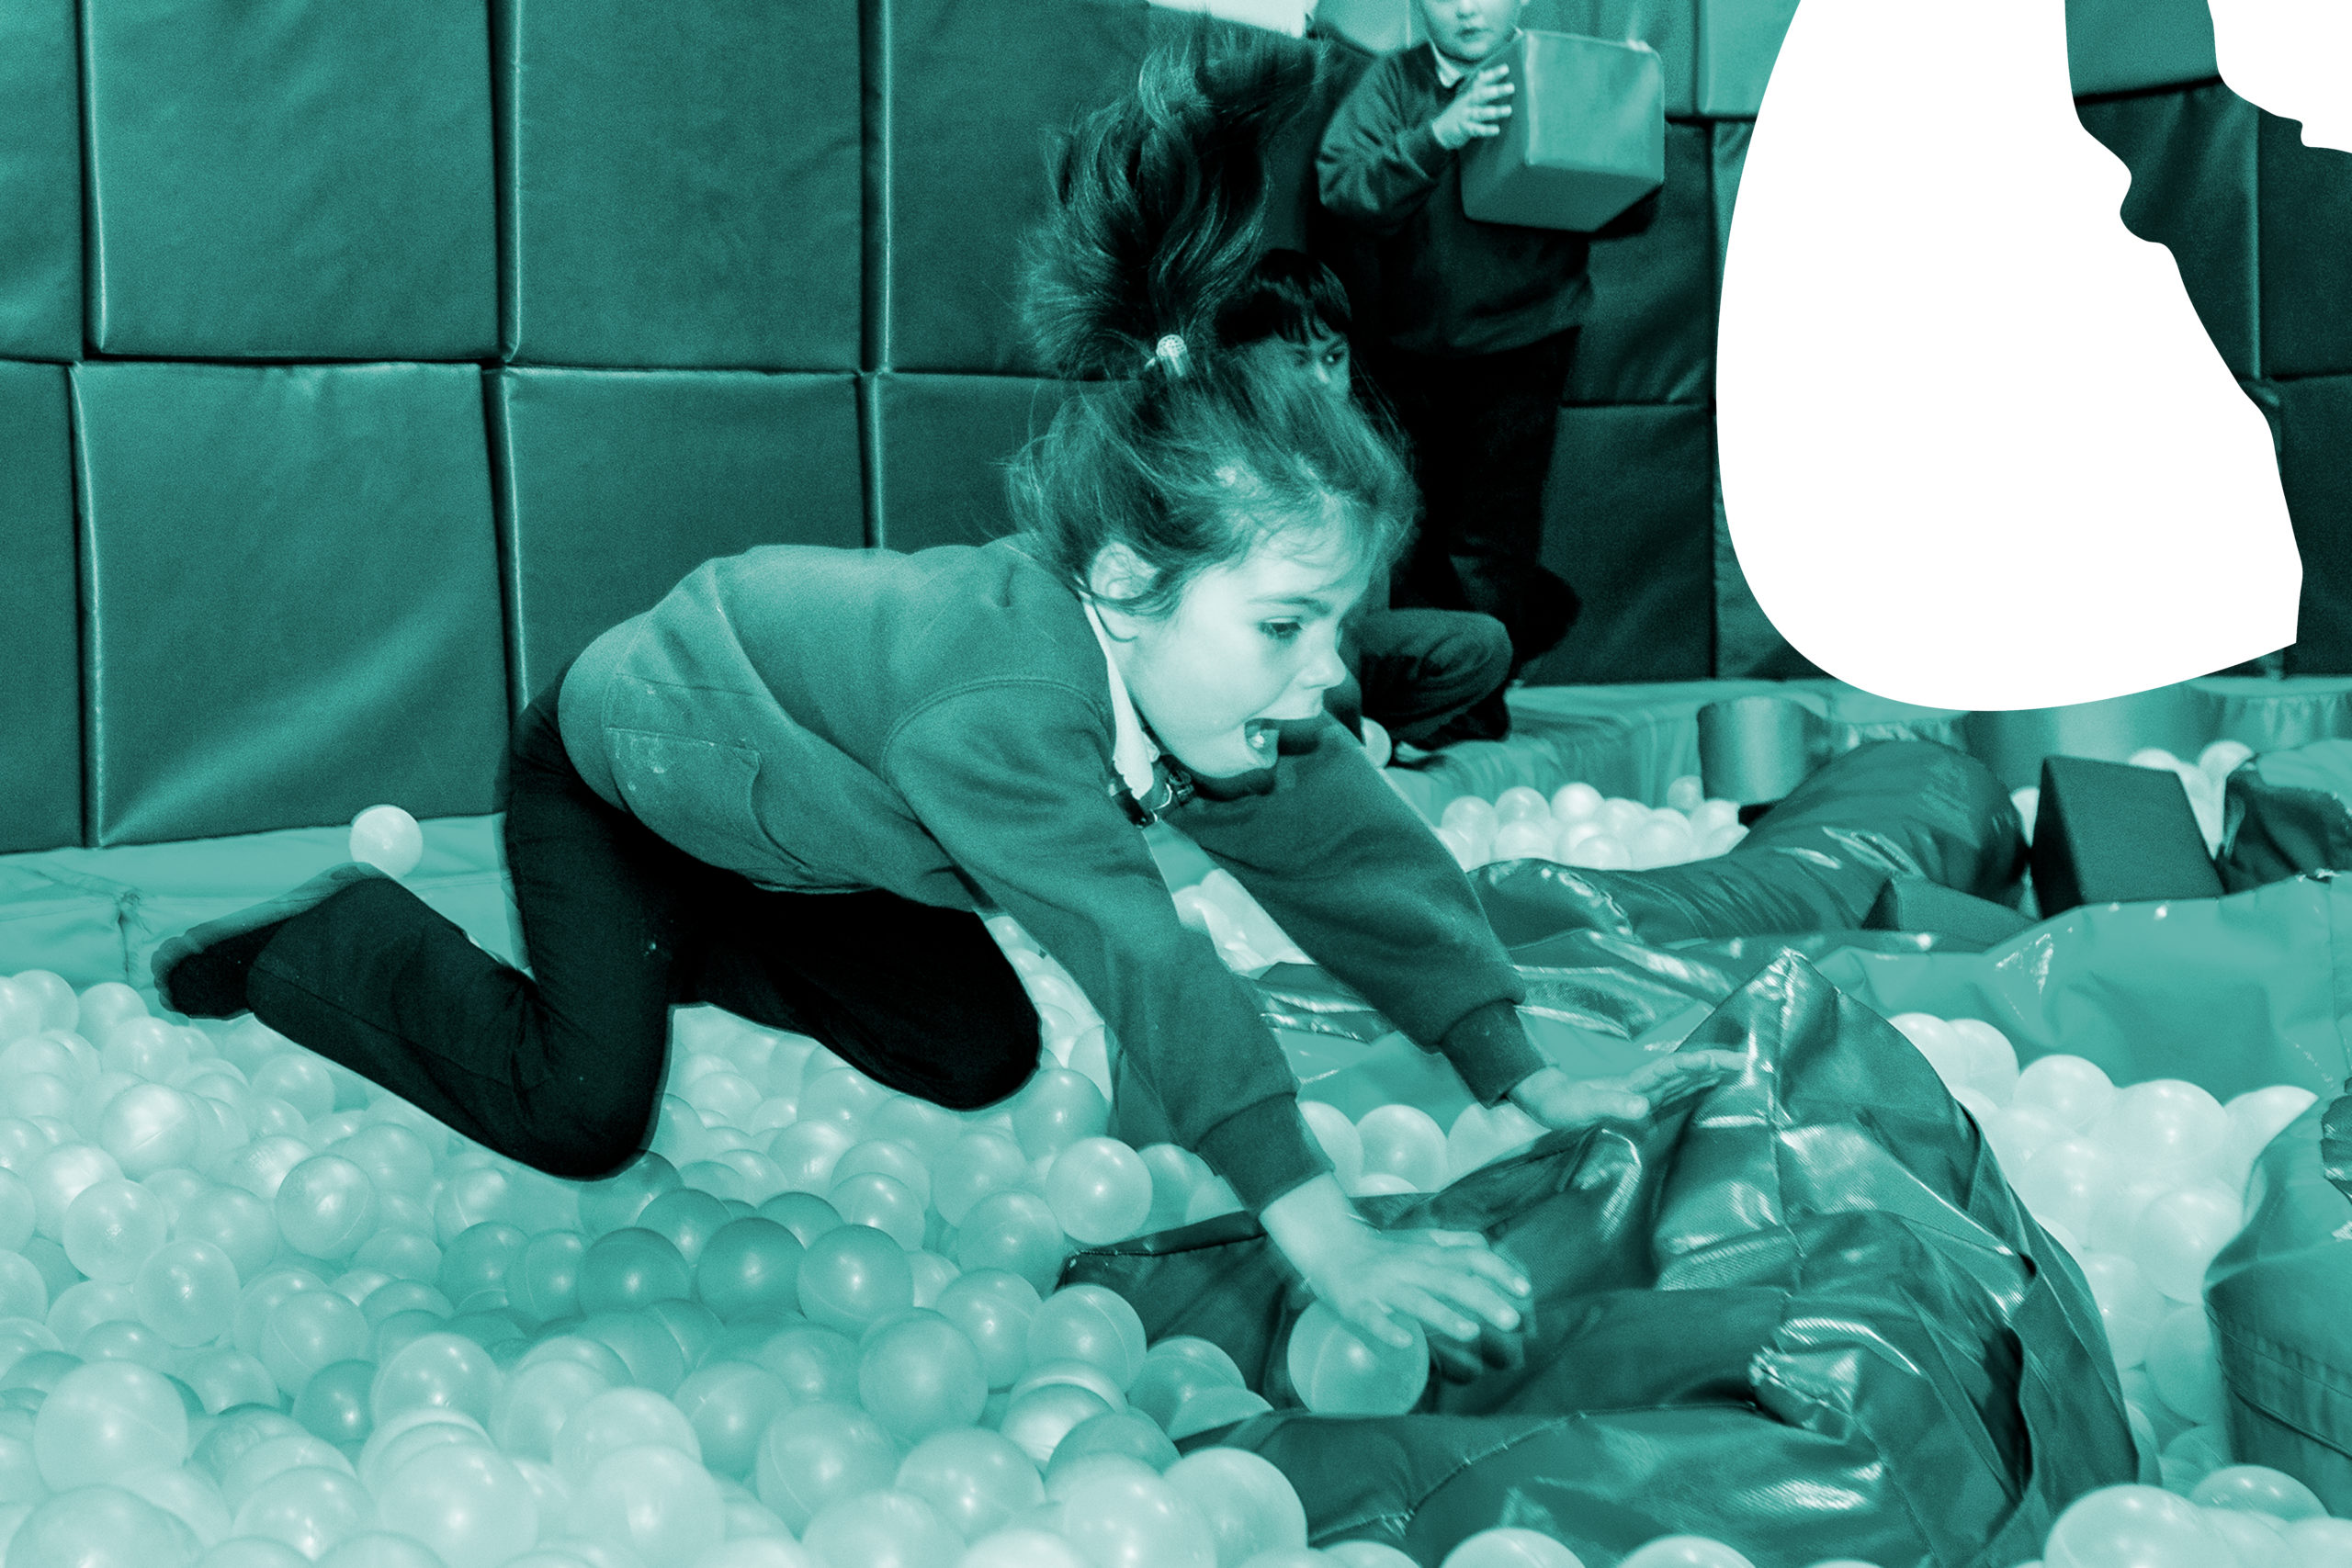 Girl jumping into the ball pit with green filter